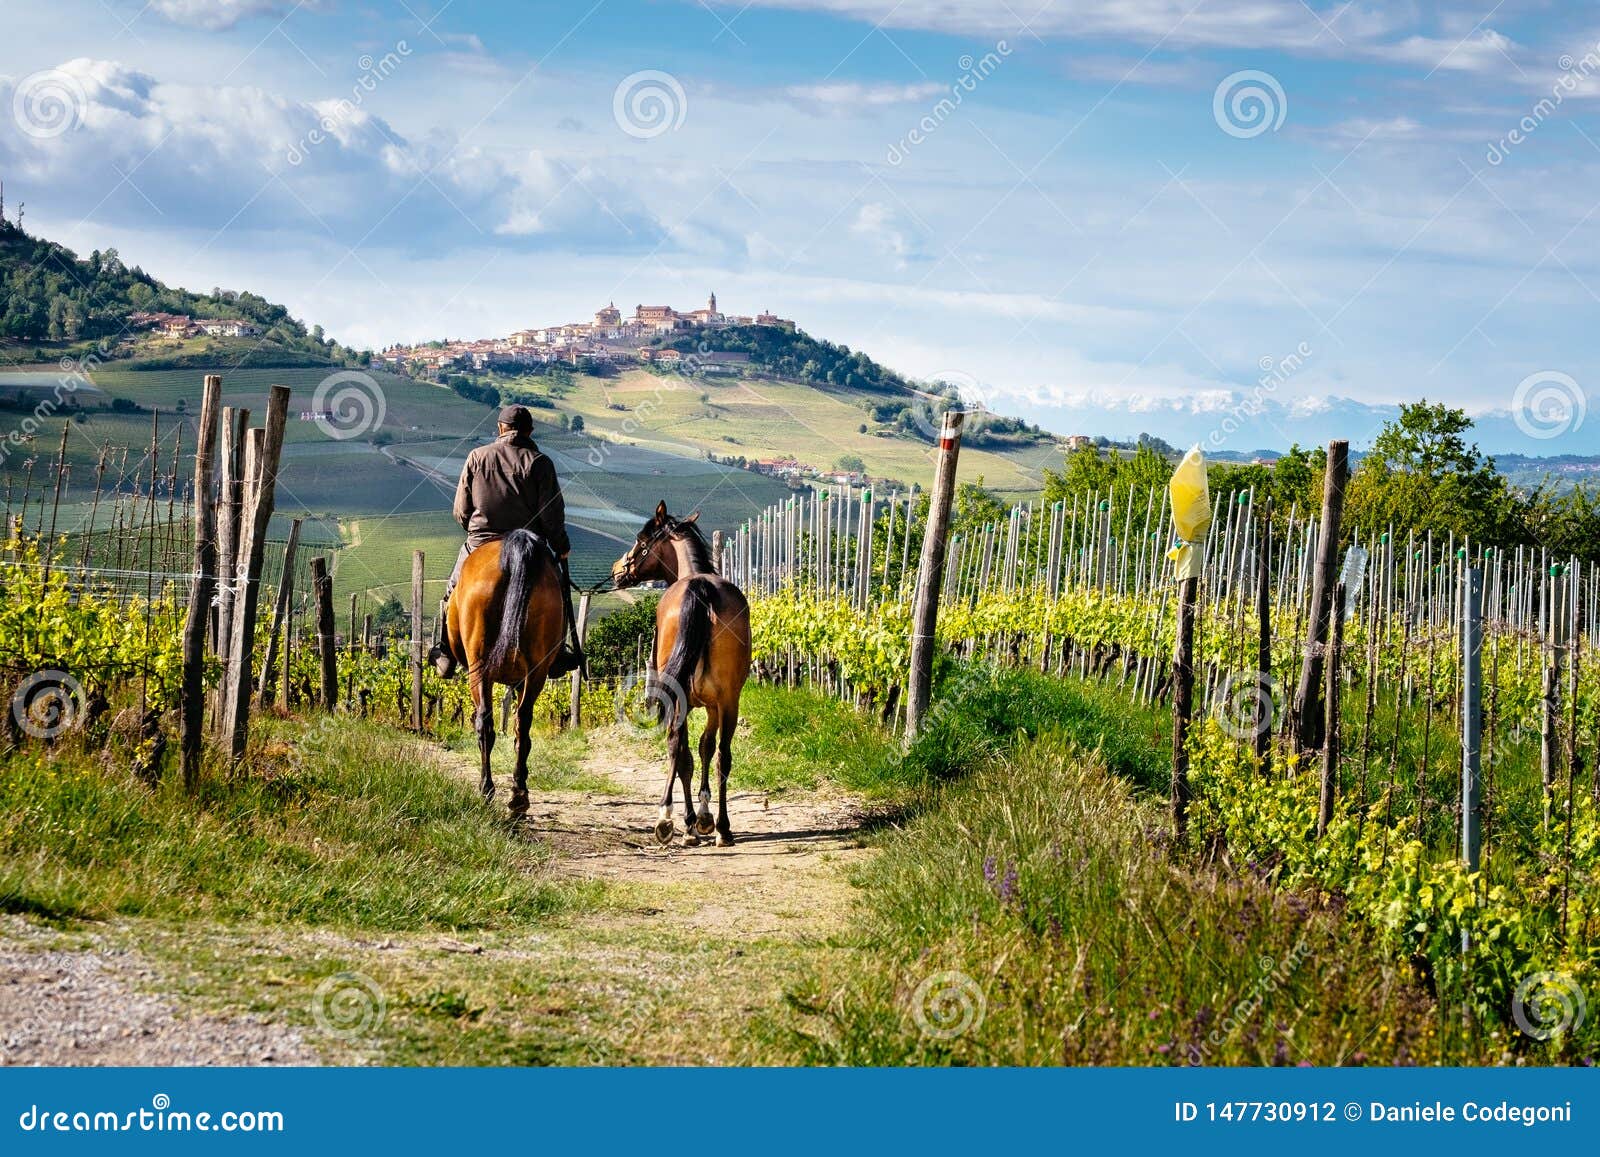 man on a horse rides among beatiful barolo vineyards with la morra village on the top of the hill. trekking pathway. viticulture,